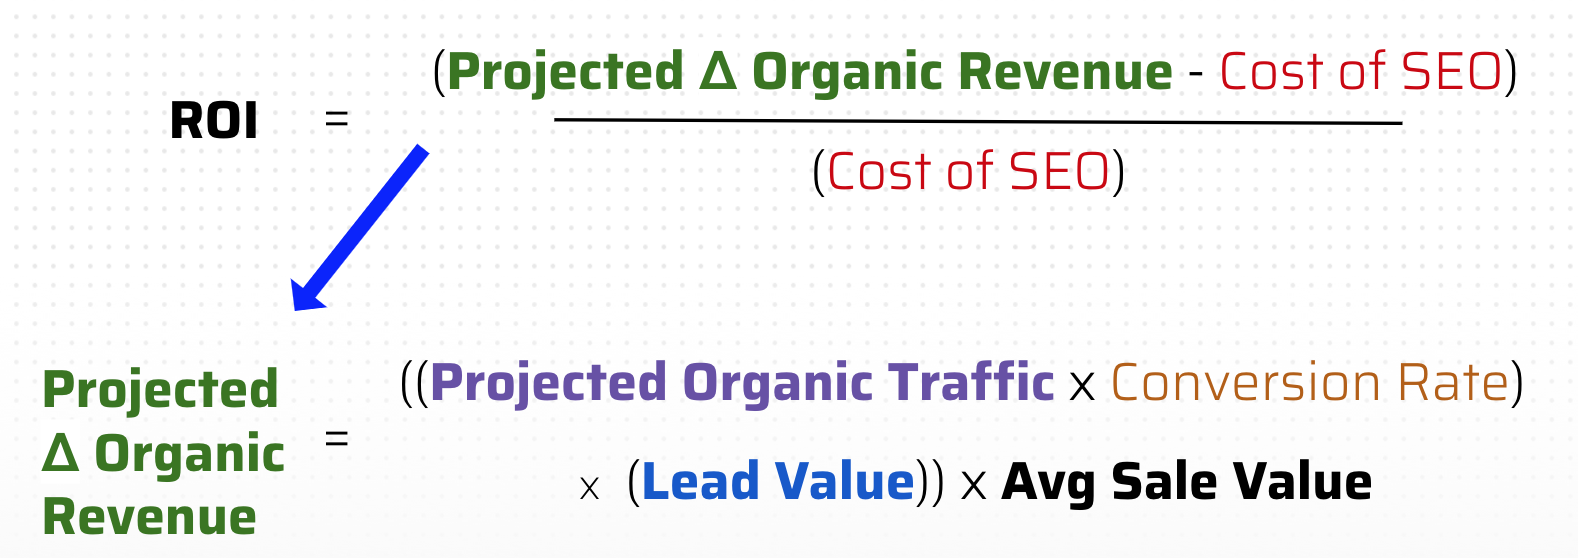 roi of seo for lead generation websites